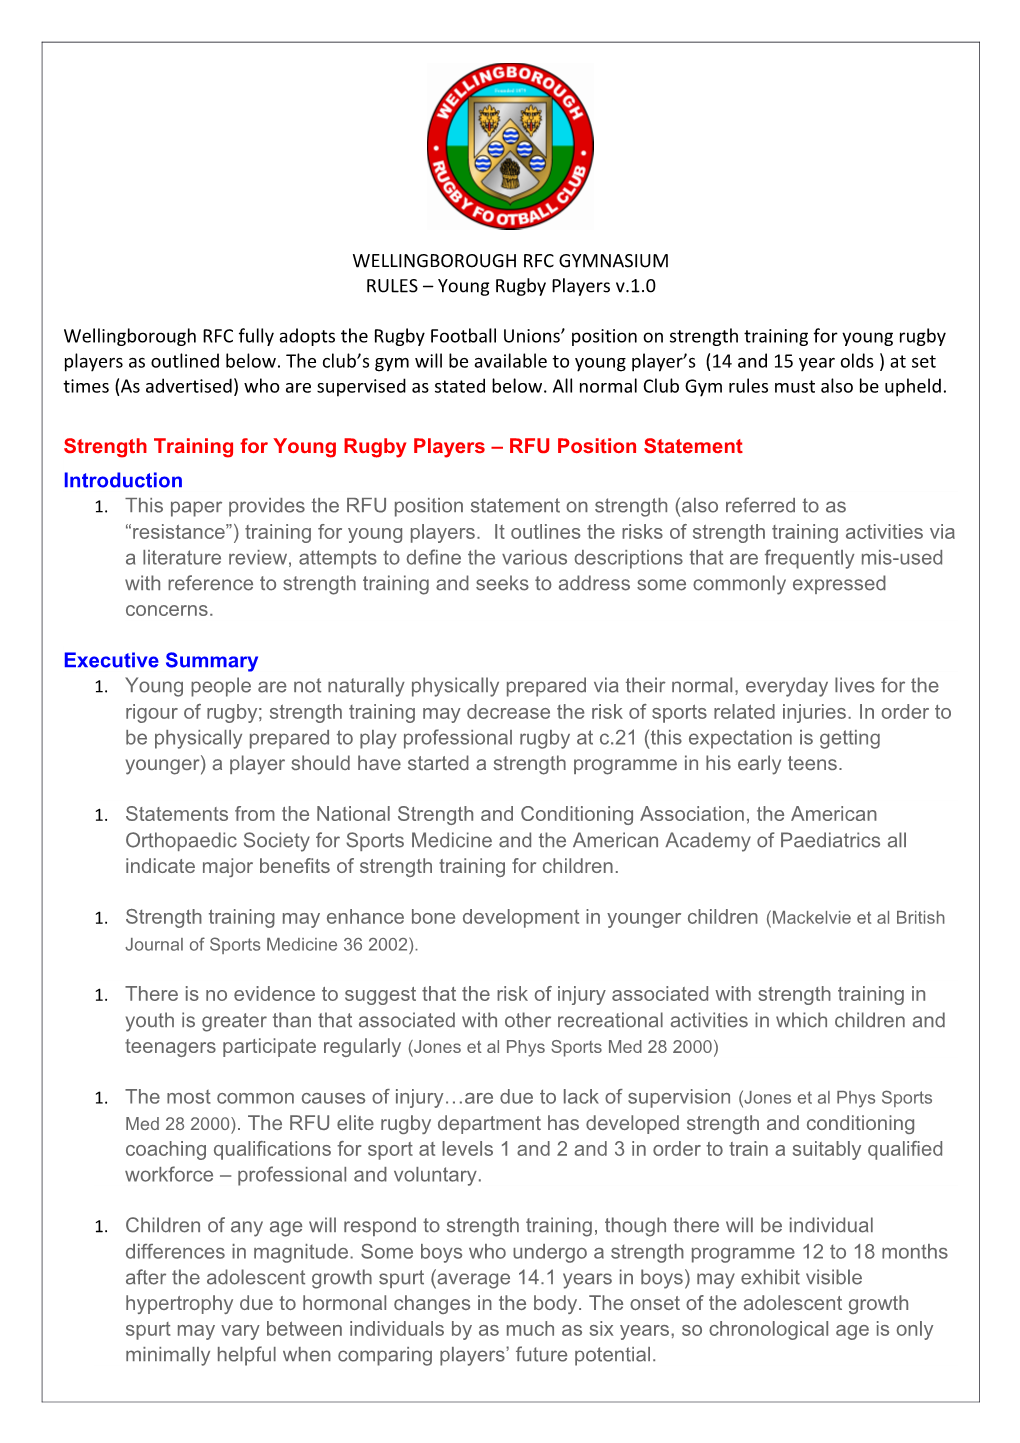 Strength Training for Young Rugby Players RFU Position Statement